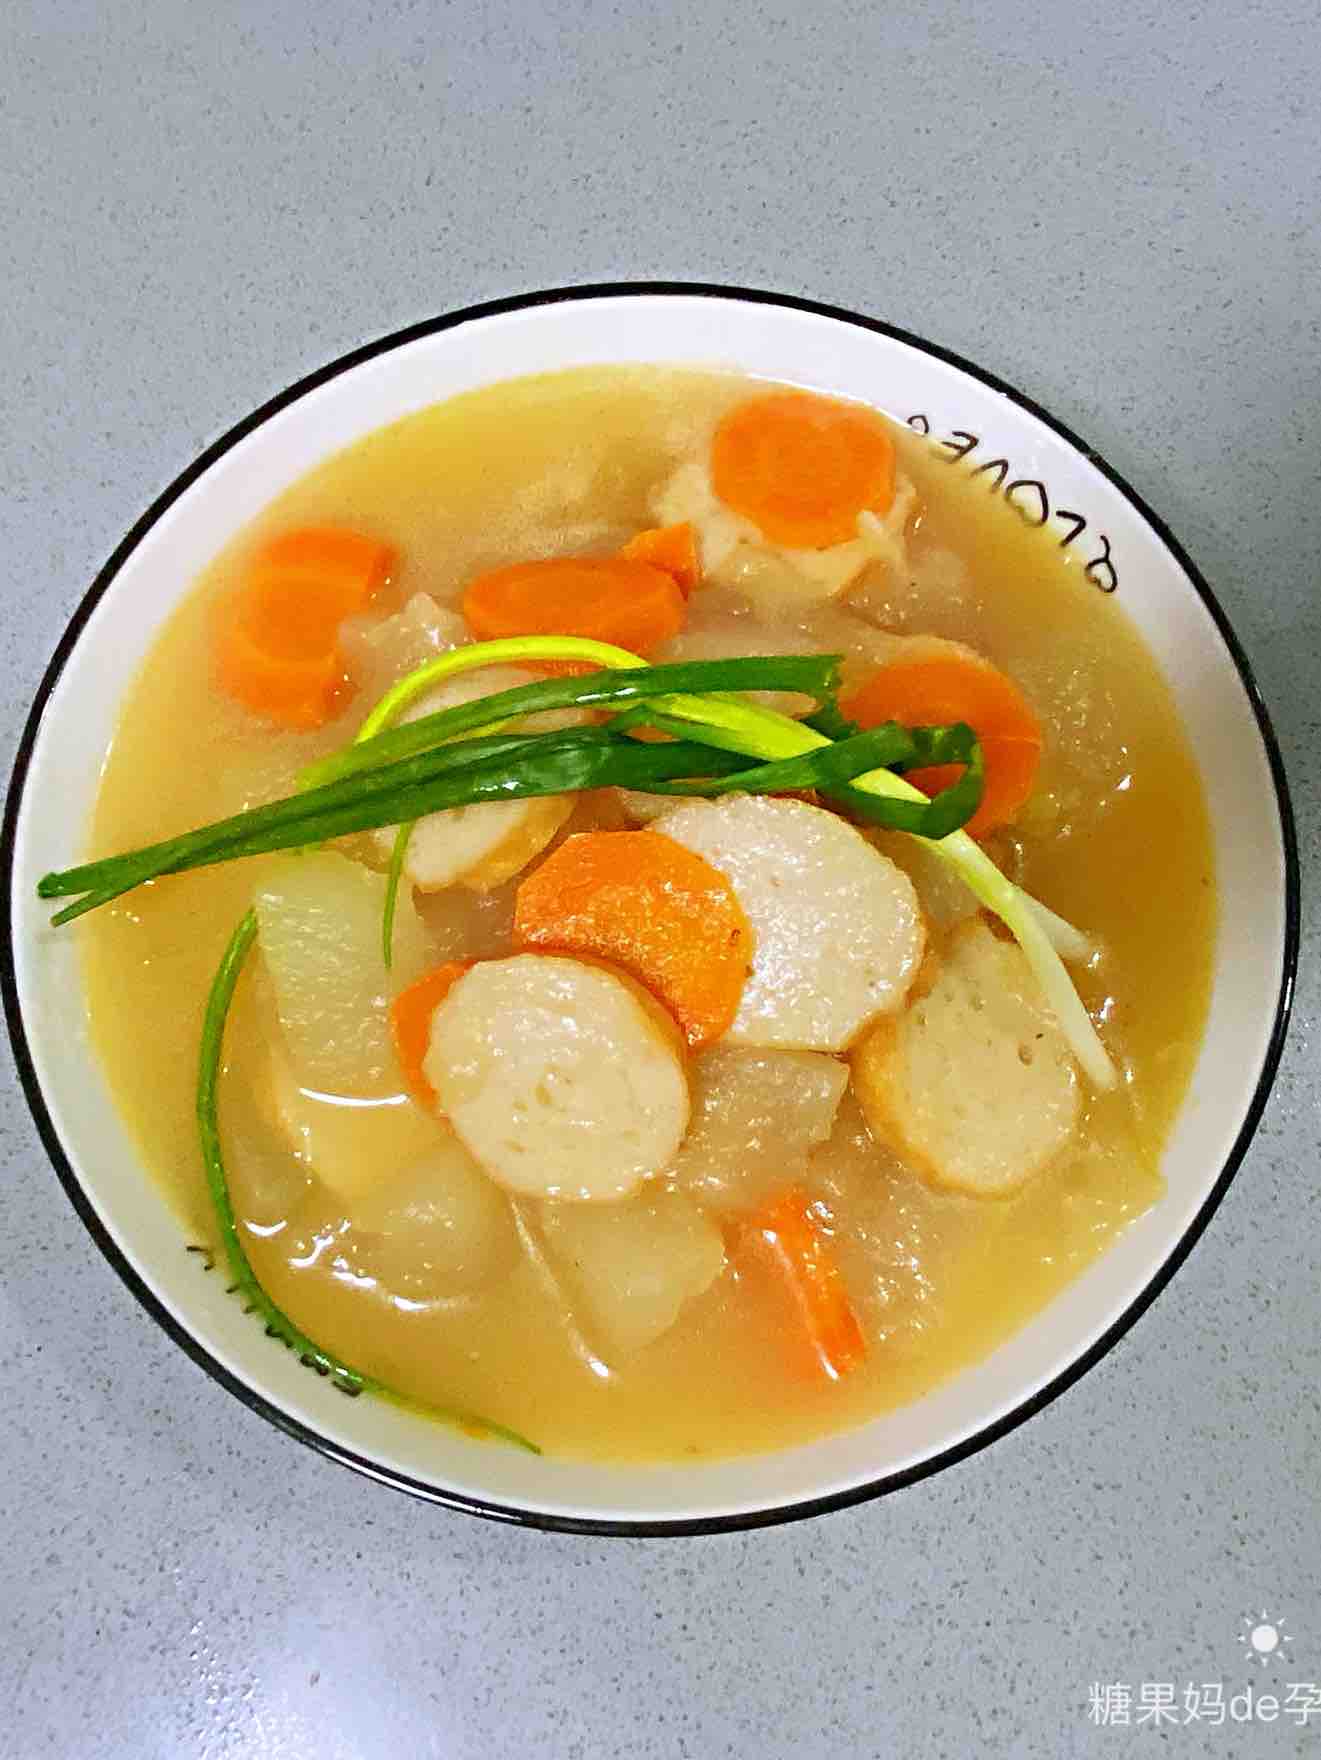 [recipe for Pregnant Women] Fish Cake and Winter Melon Soup, Sweet and Delicious, Umami recipe